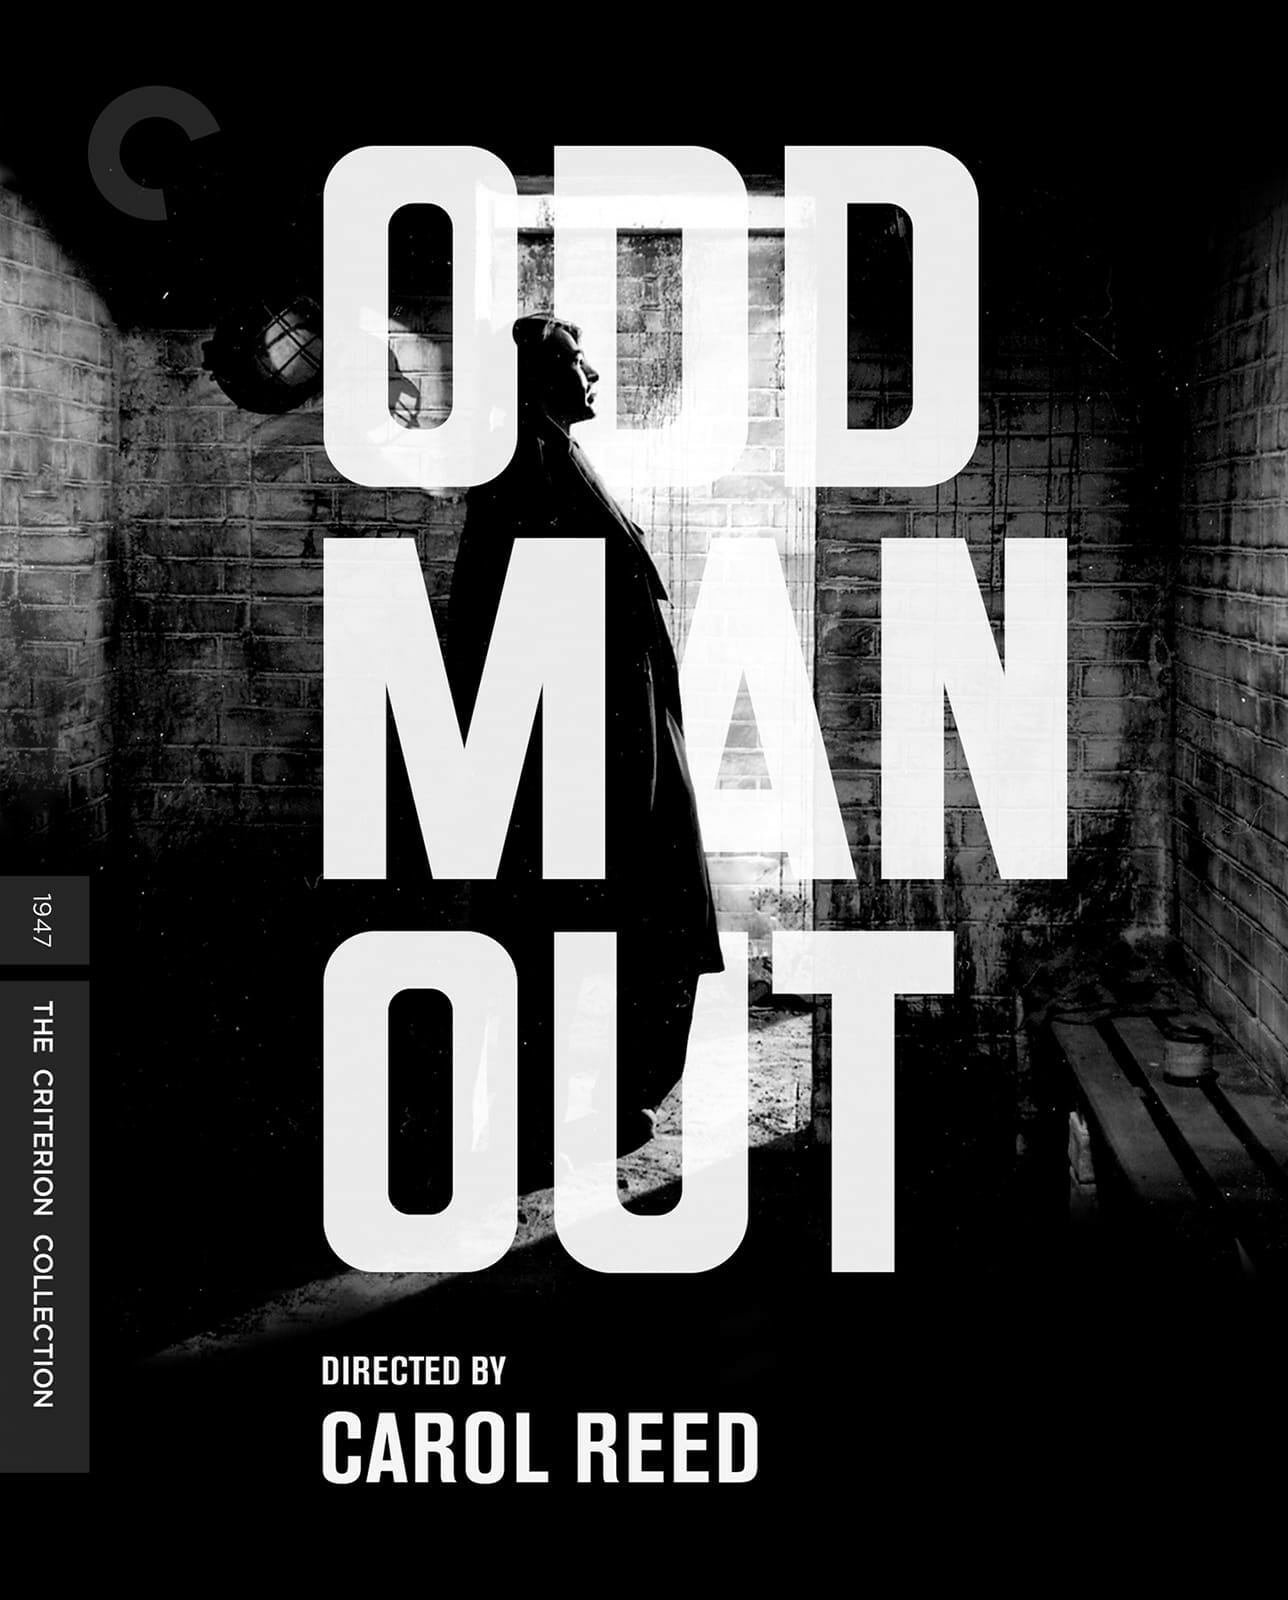 Carol Reed’s ‘Odd Man Out’—Too Long In ‘The Third Man’s Shadow?